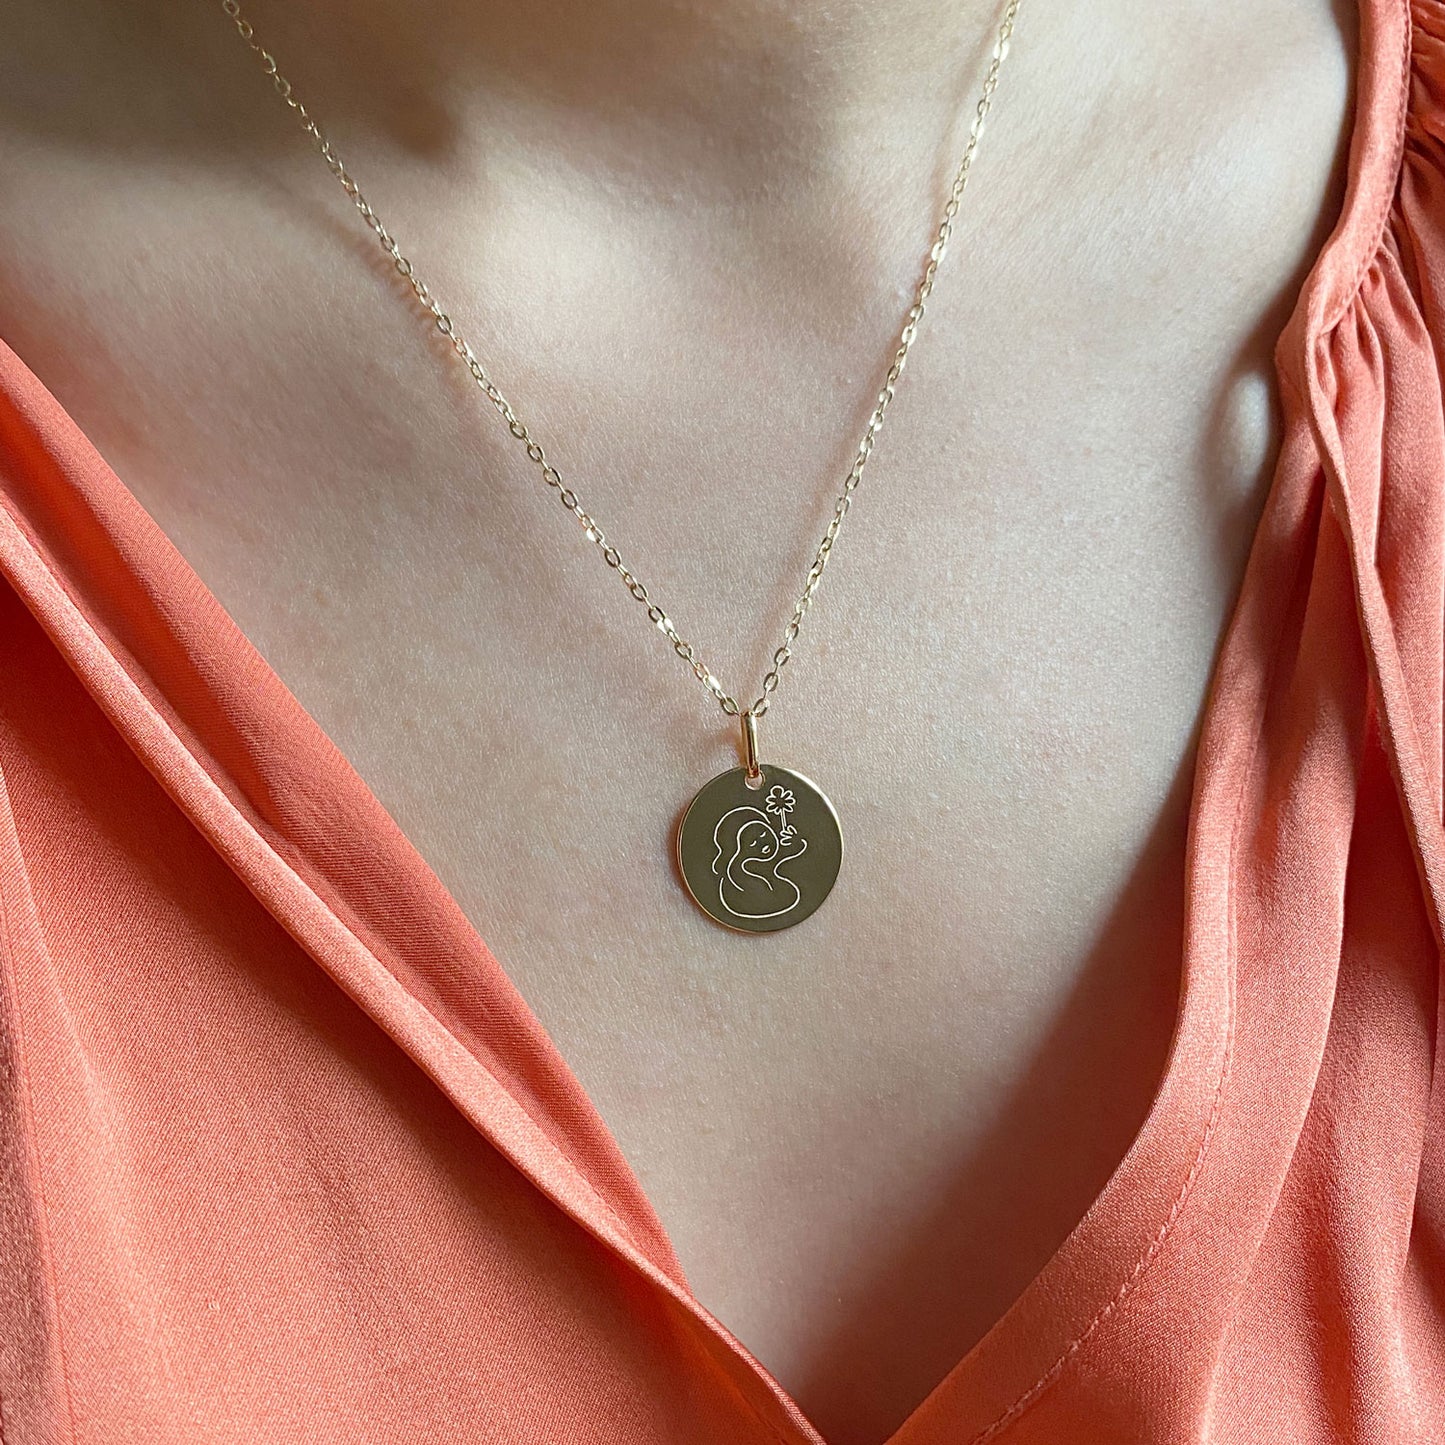 Muze 18k gold vermeil peace medal necklace, art inspired jewelry, dainty talisman symbol of protection, peace and serenity.Meaningful sentimental gift perfect for wife girlfriend or as friendship present.